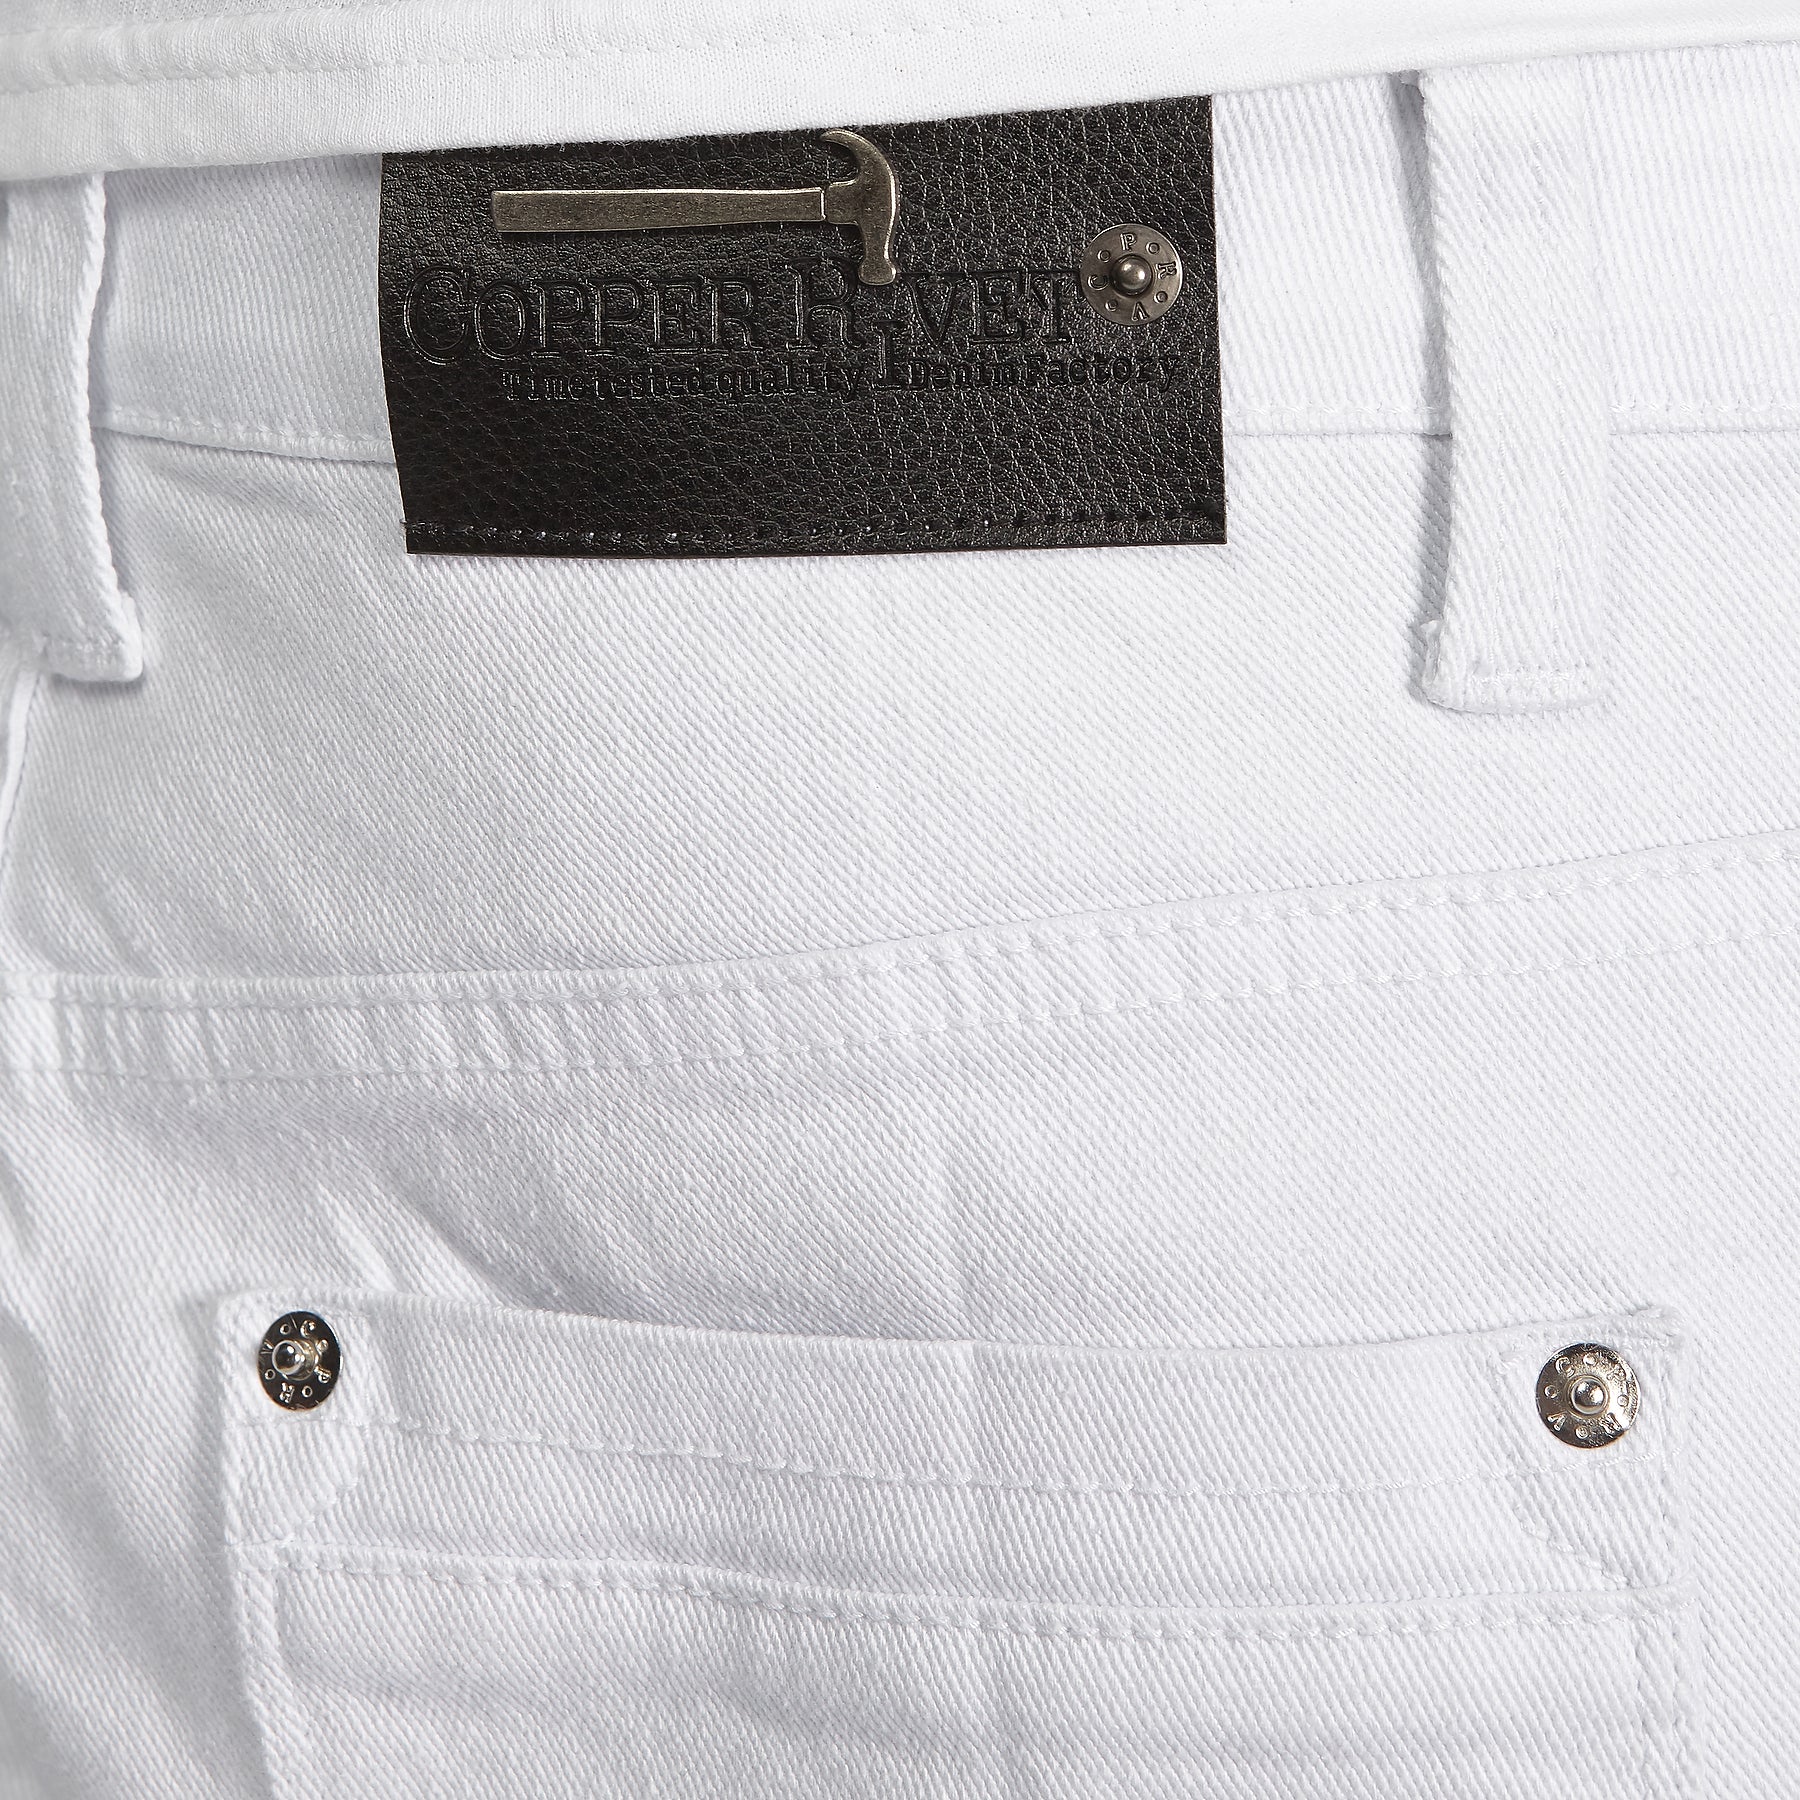 WHITE PANTS WITH RIPS & PERMANENT WRINKLES - Copper Rivet